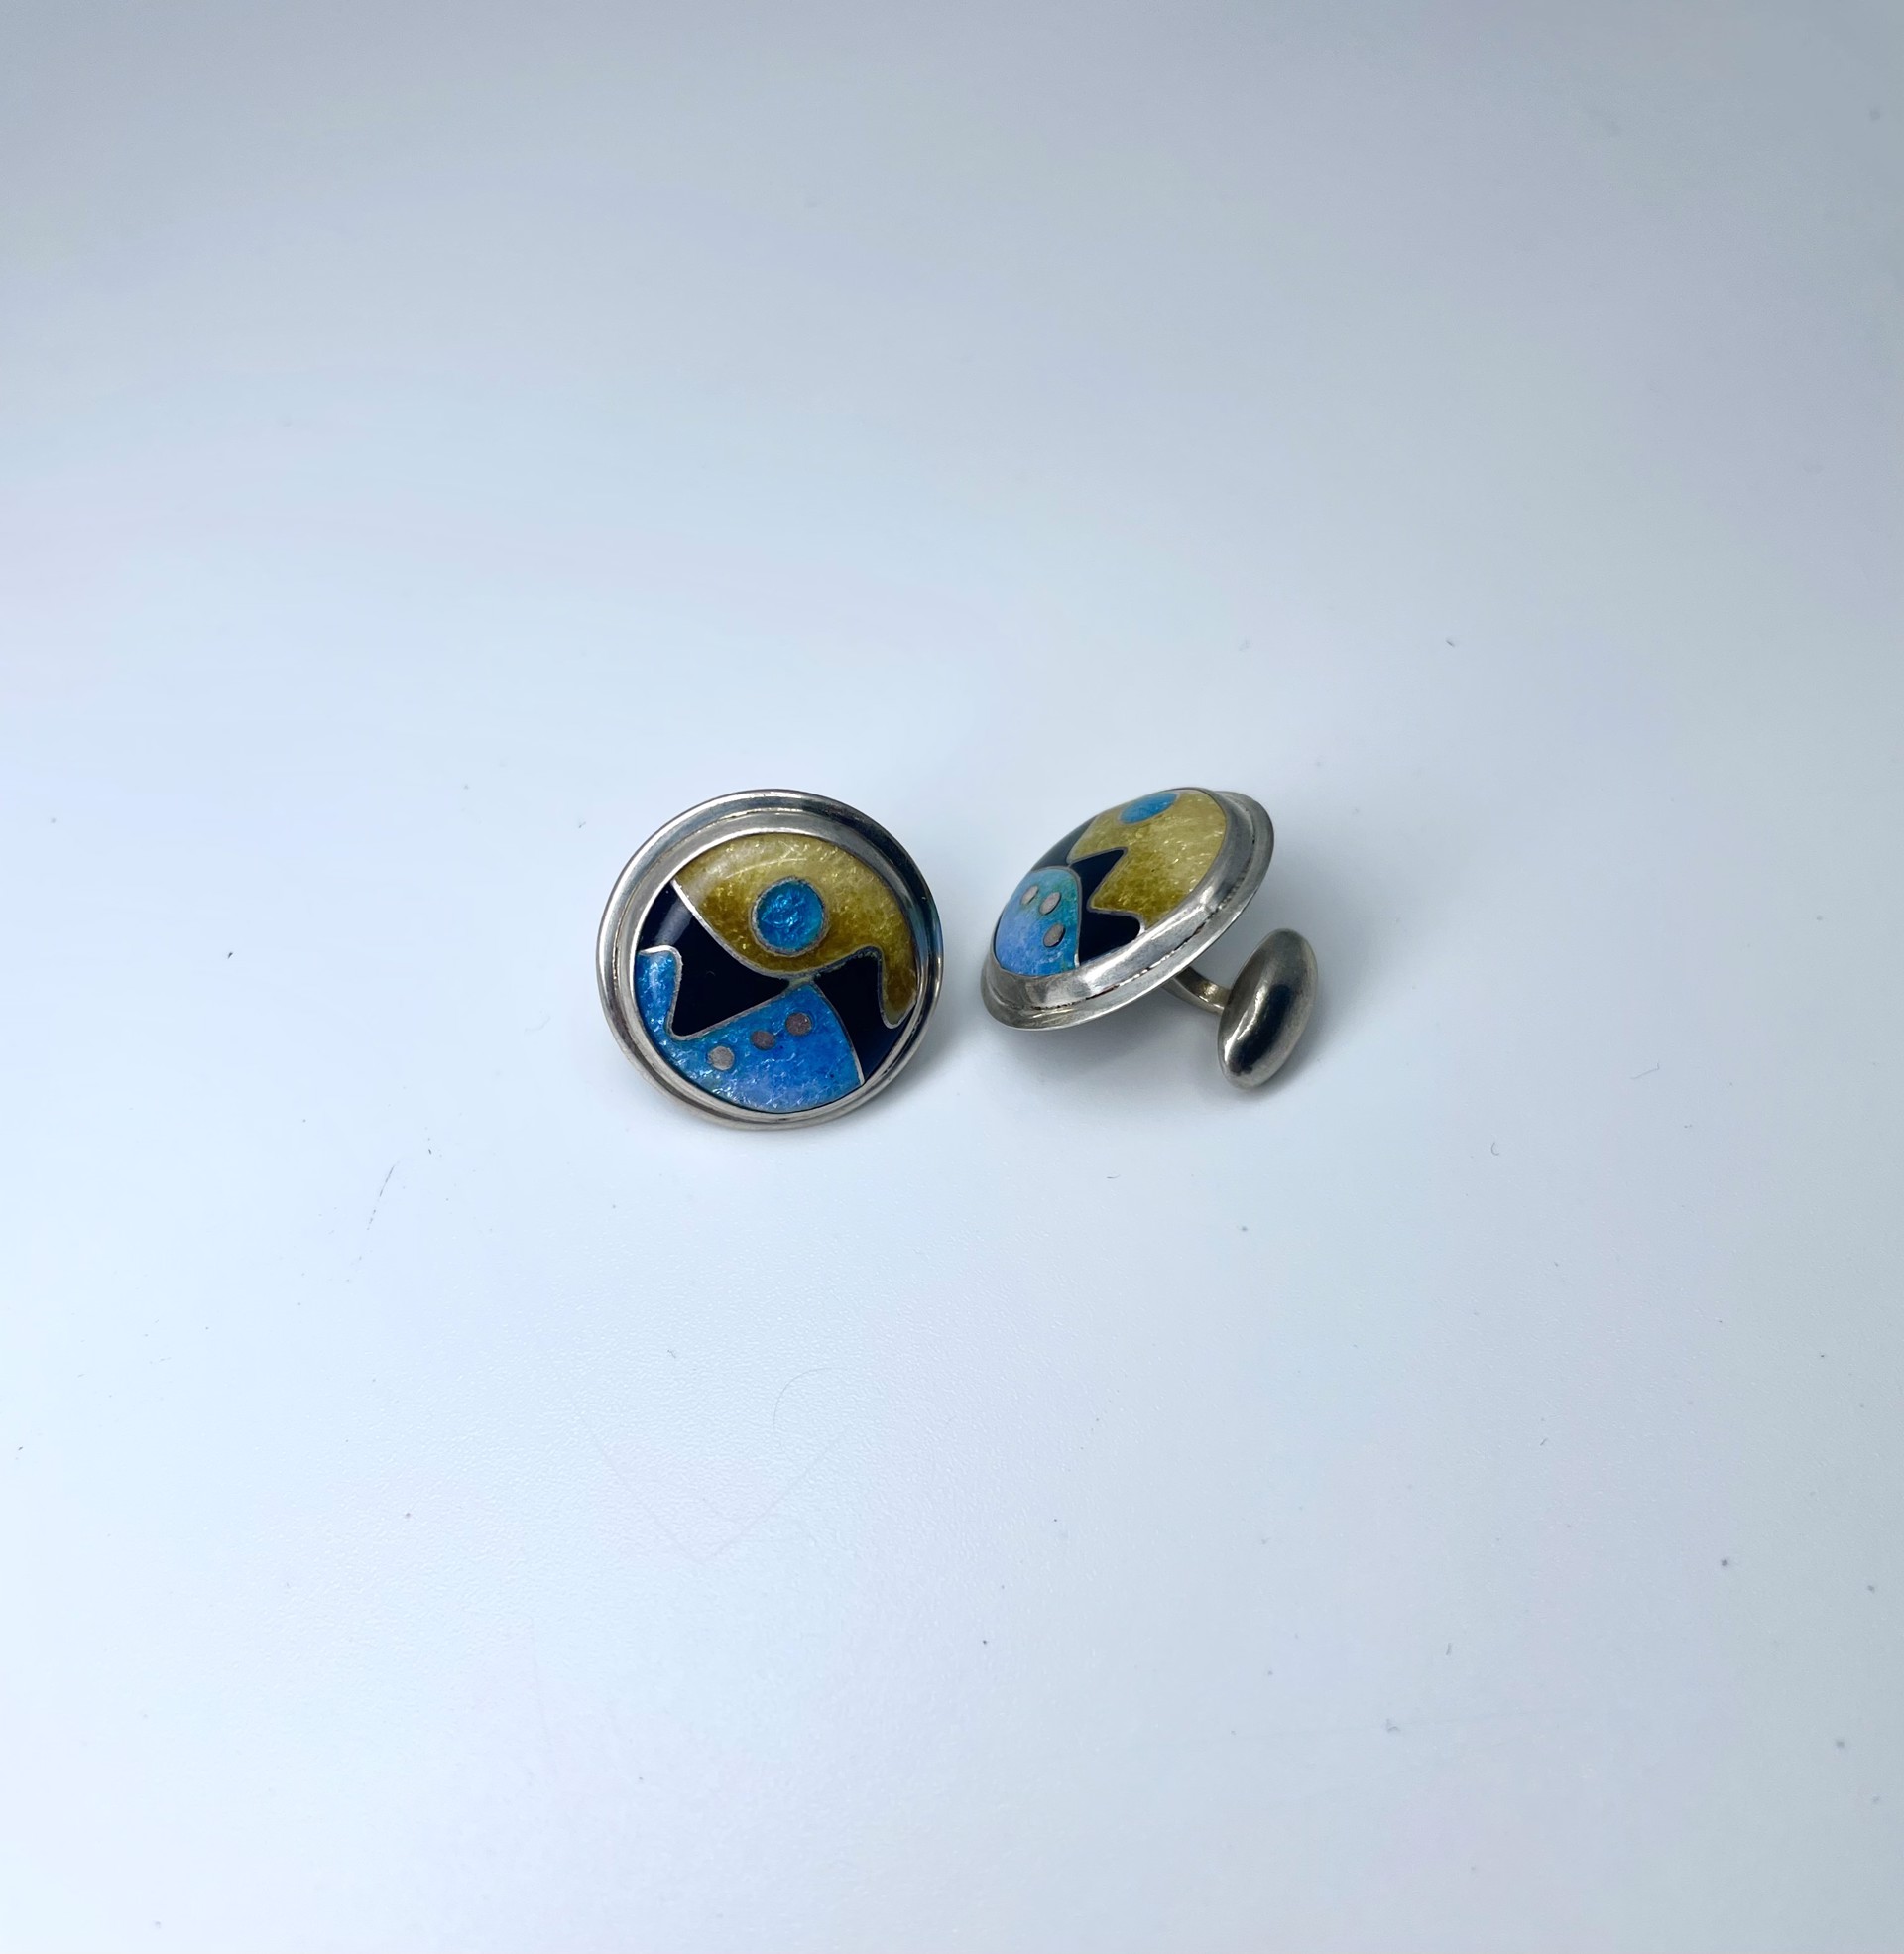 2376 Blue And Yellow Cufflinks by Lanni